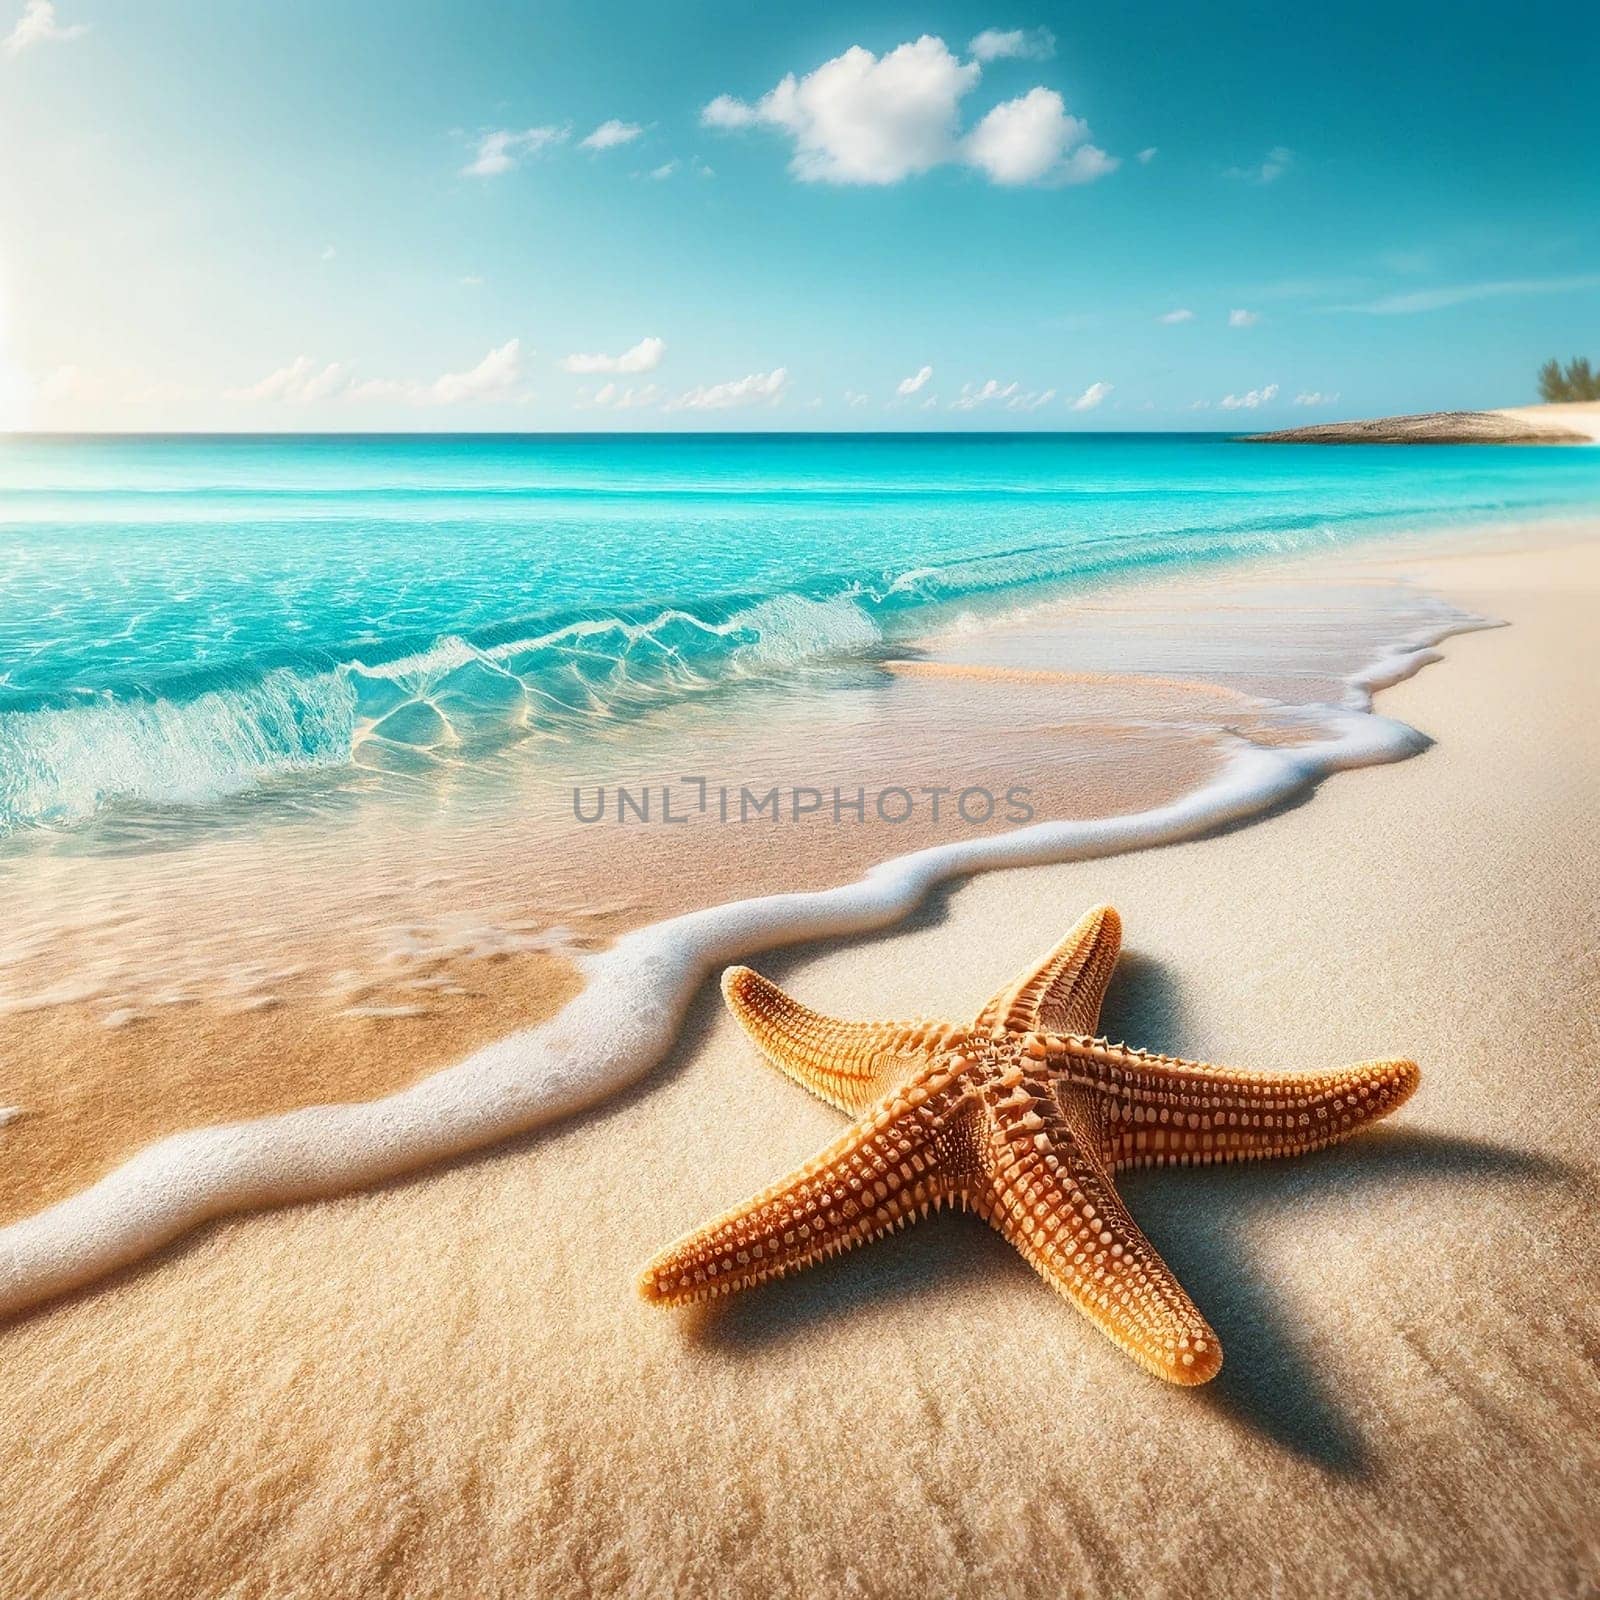 A close-up view of a starfish gracefully laying on a pristine sandy beach next to the crystal clear turquoise waters of the ocean.